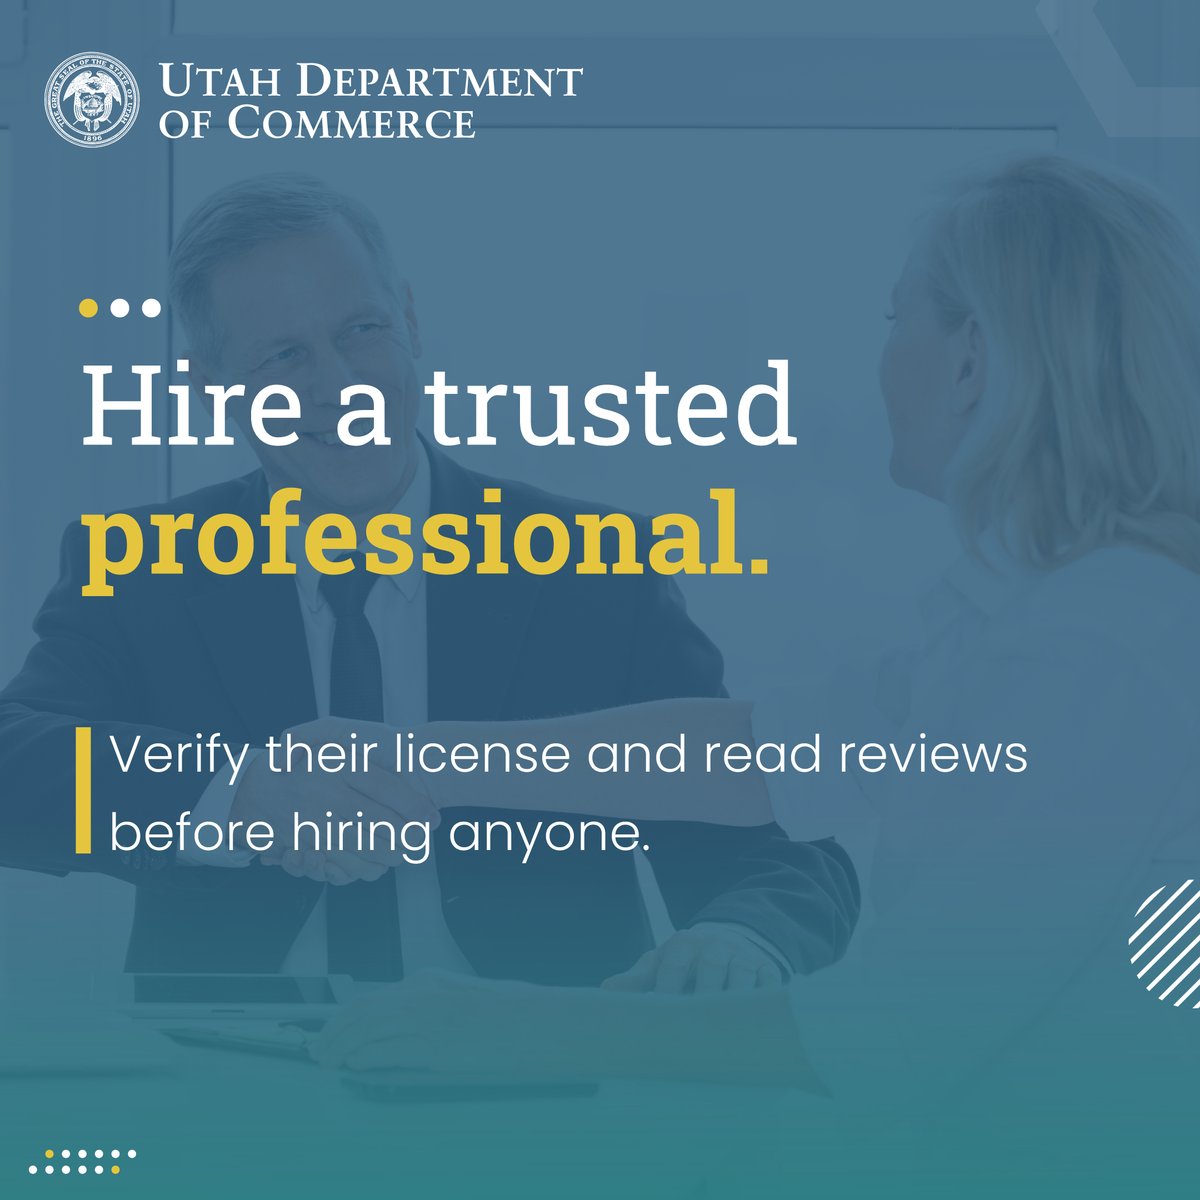 Verifying a license is the first step in hiring a trusted professional. Here are some additional steps: ·Read online reviews for the professional and their company ·Get referrals from neighbors, family, and others you trust ·Receive multiple bids/quotes secure.utah.gov/llv/search/ind…